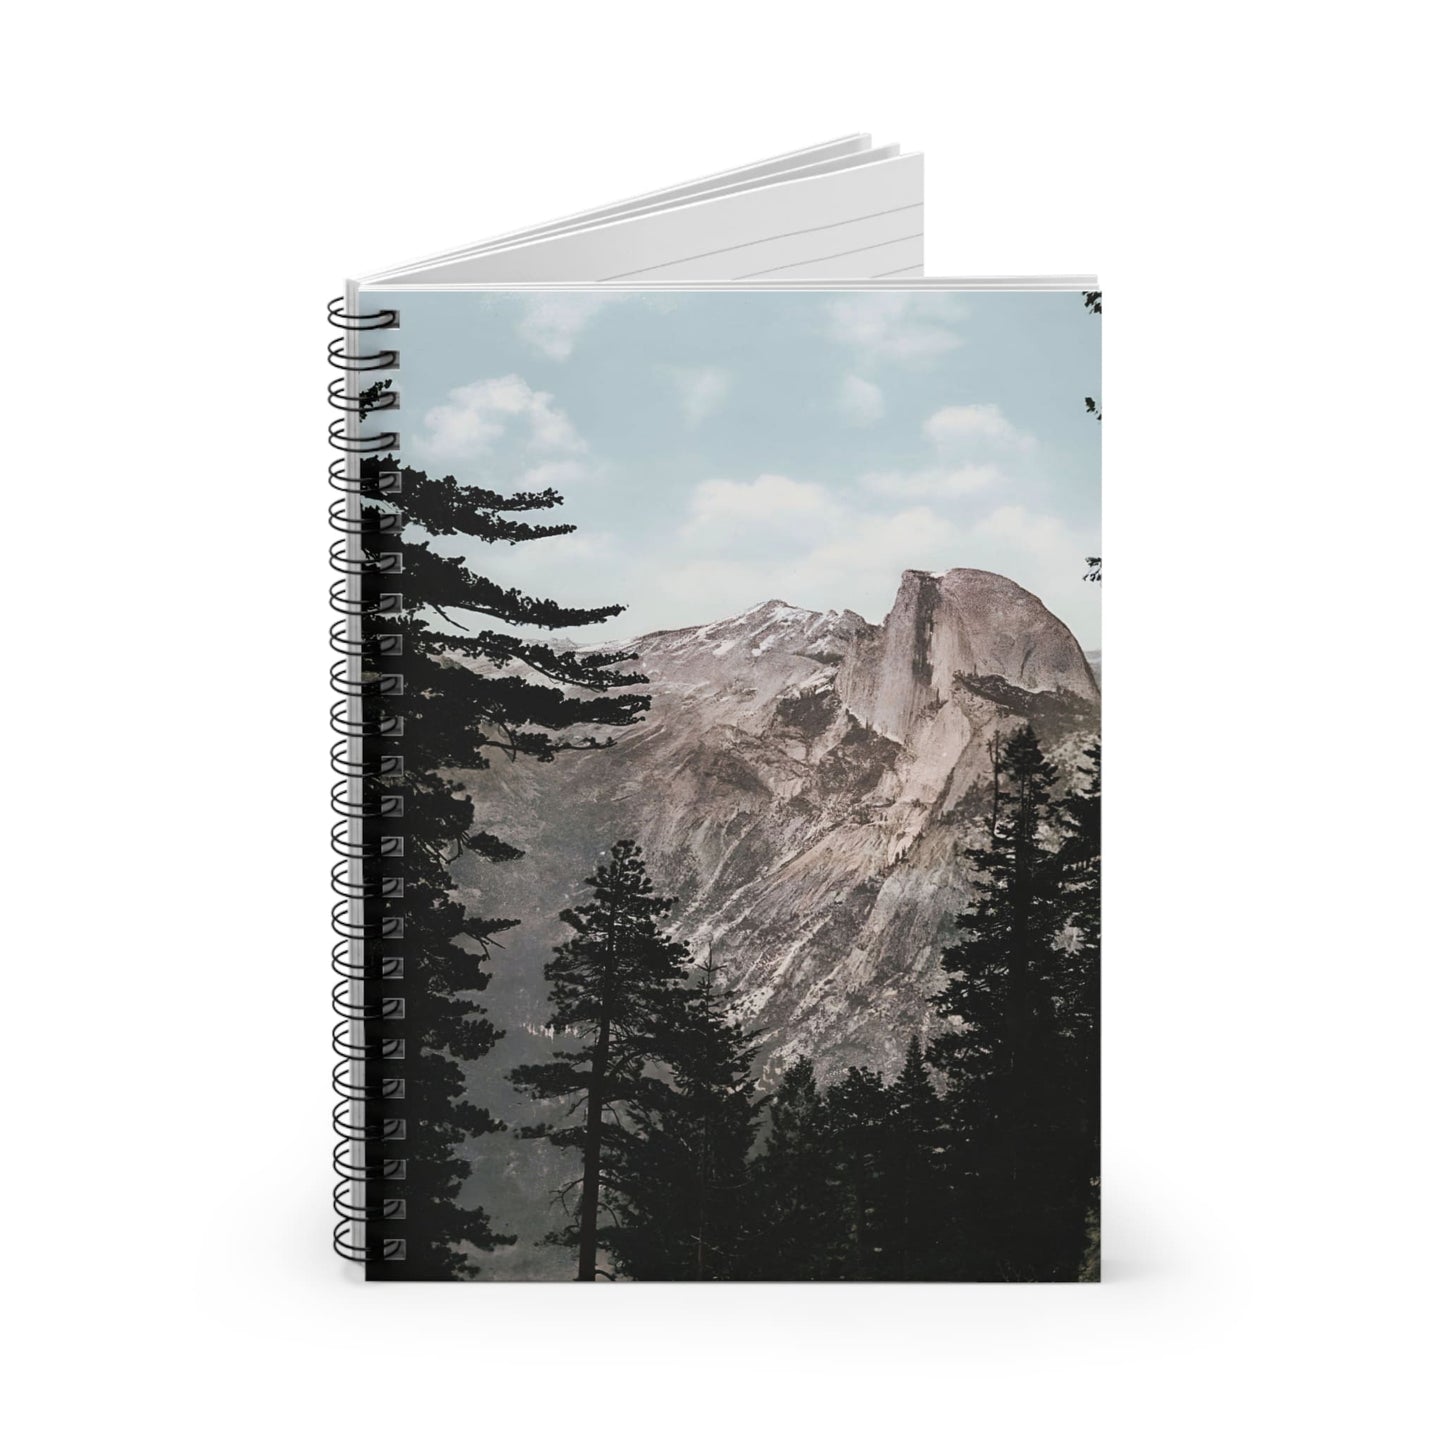 Forest and Mountains Spiral Notebook Standing up on White Desk